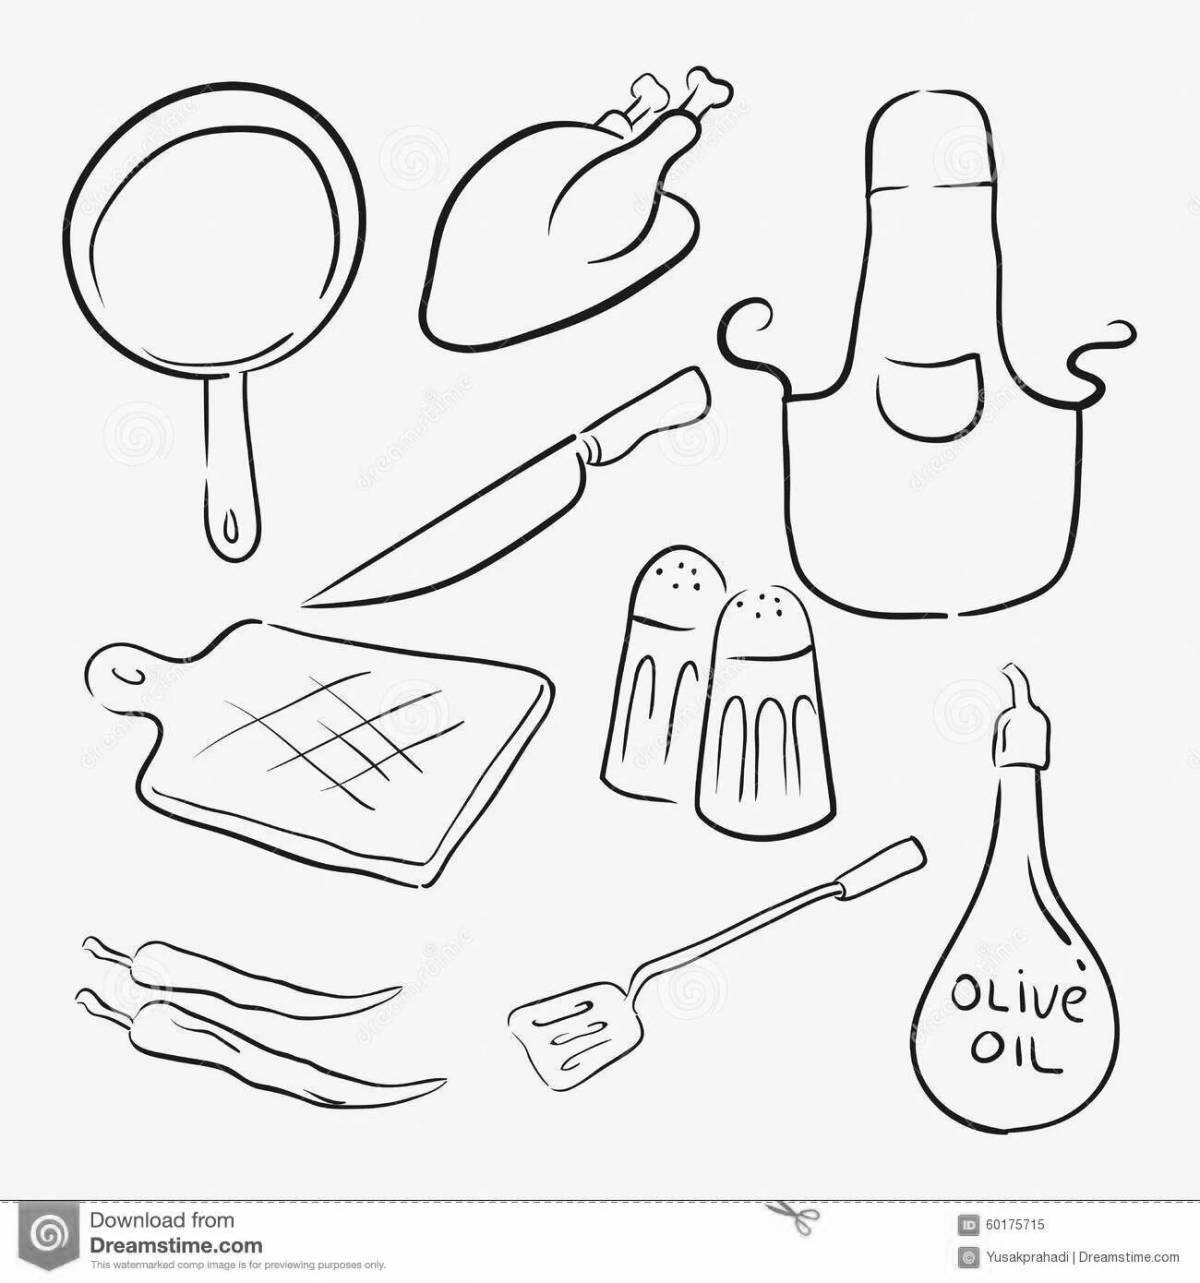 Sweet cook tools coloring book